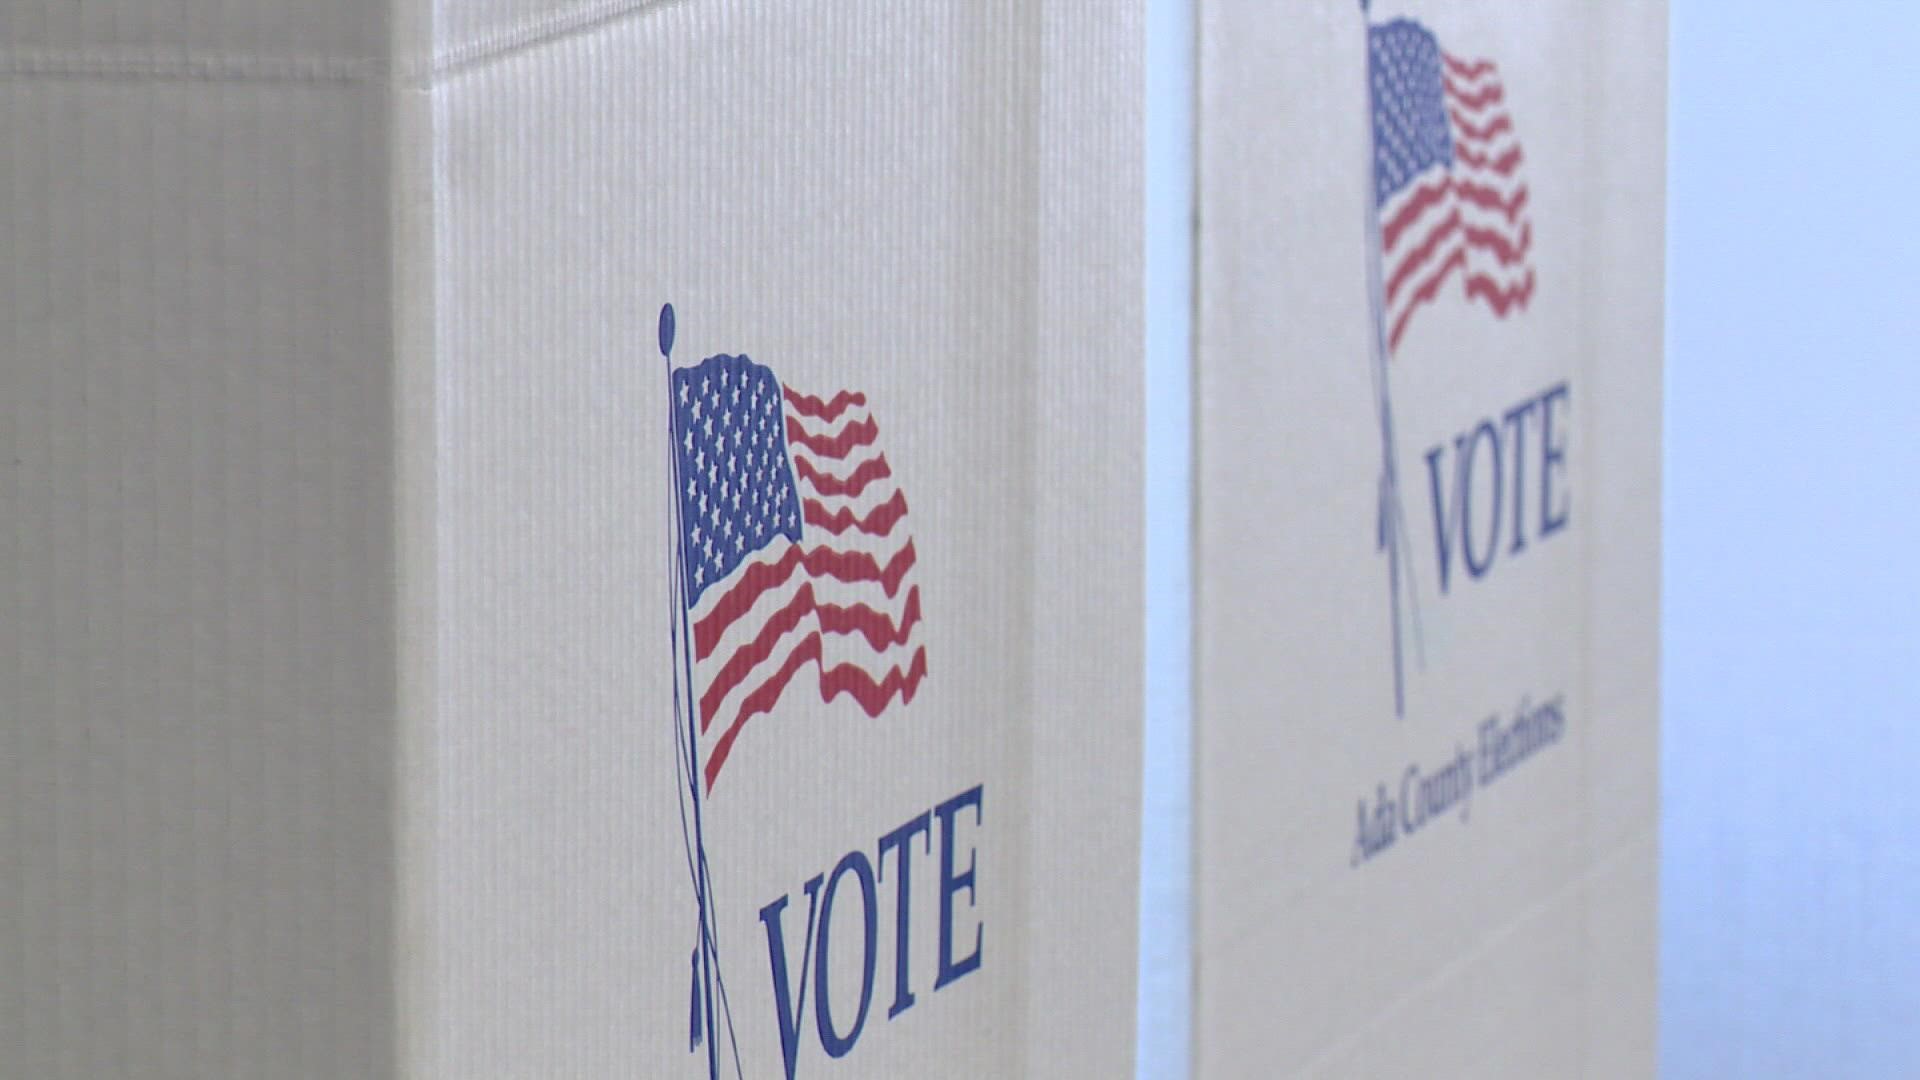 Across the state, voters will decide who will be on the November ballot.